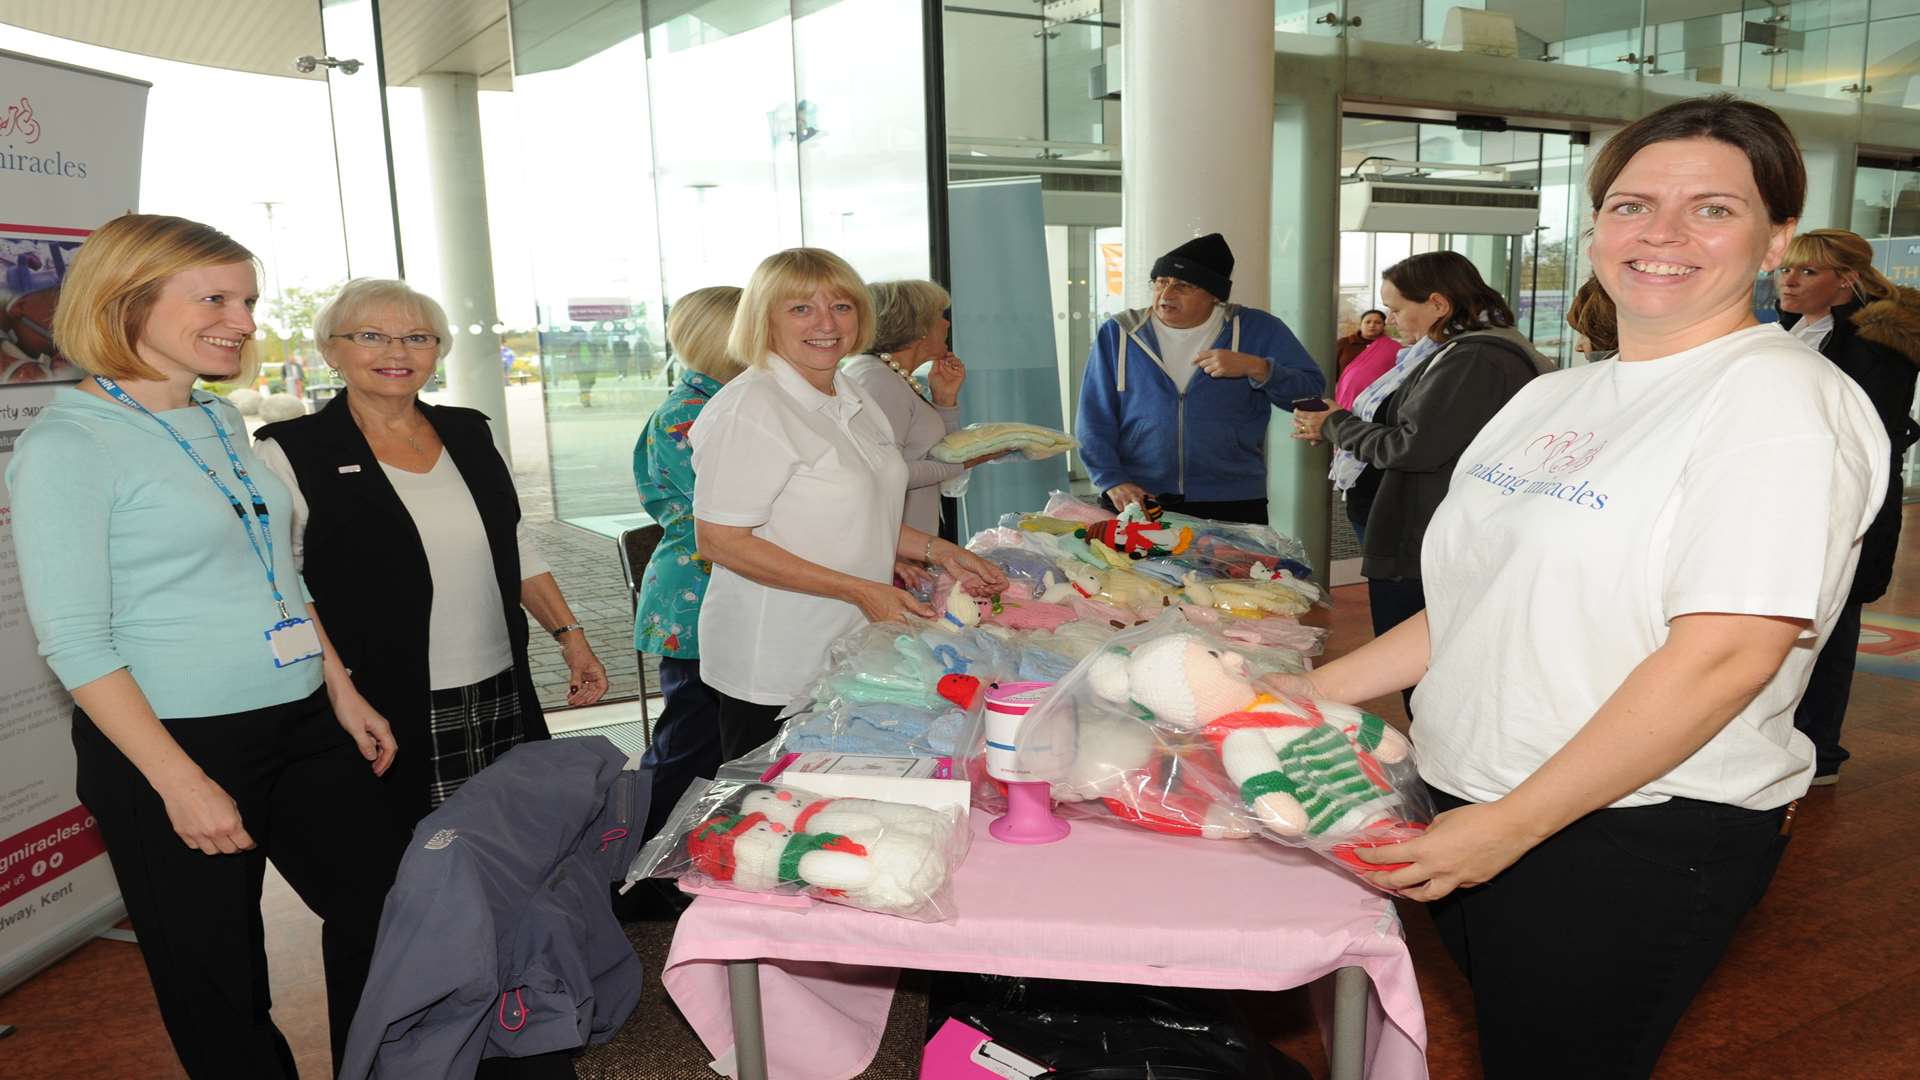 Darent Valley Hospital, Dartford. New Making Miracles charity stall in reception, Kelly Wells (right)